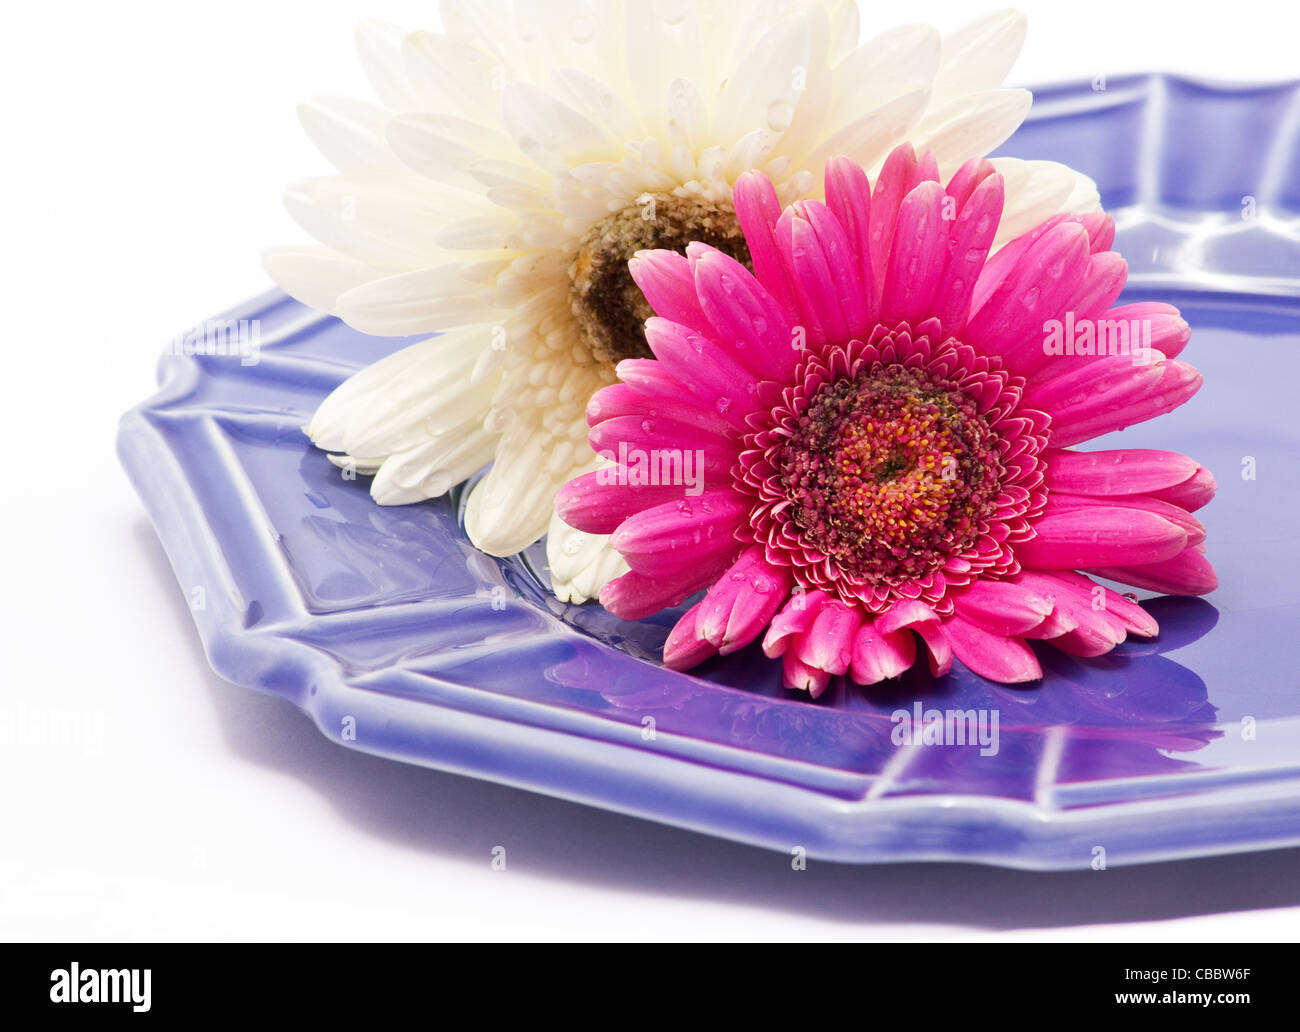 Pink and white flowers on a blue plate on white background Stock Photo